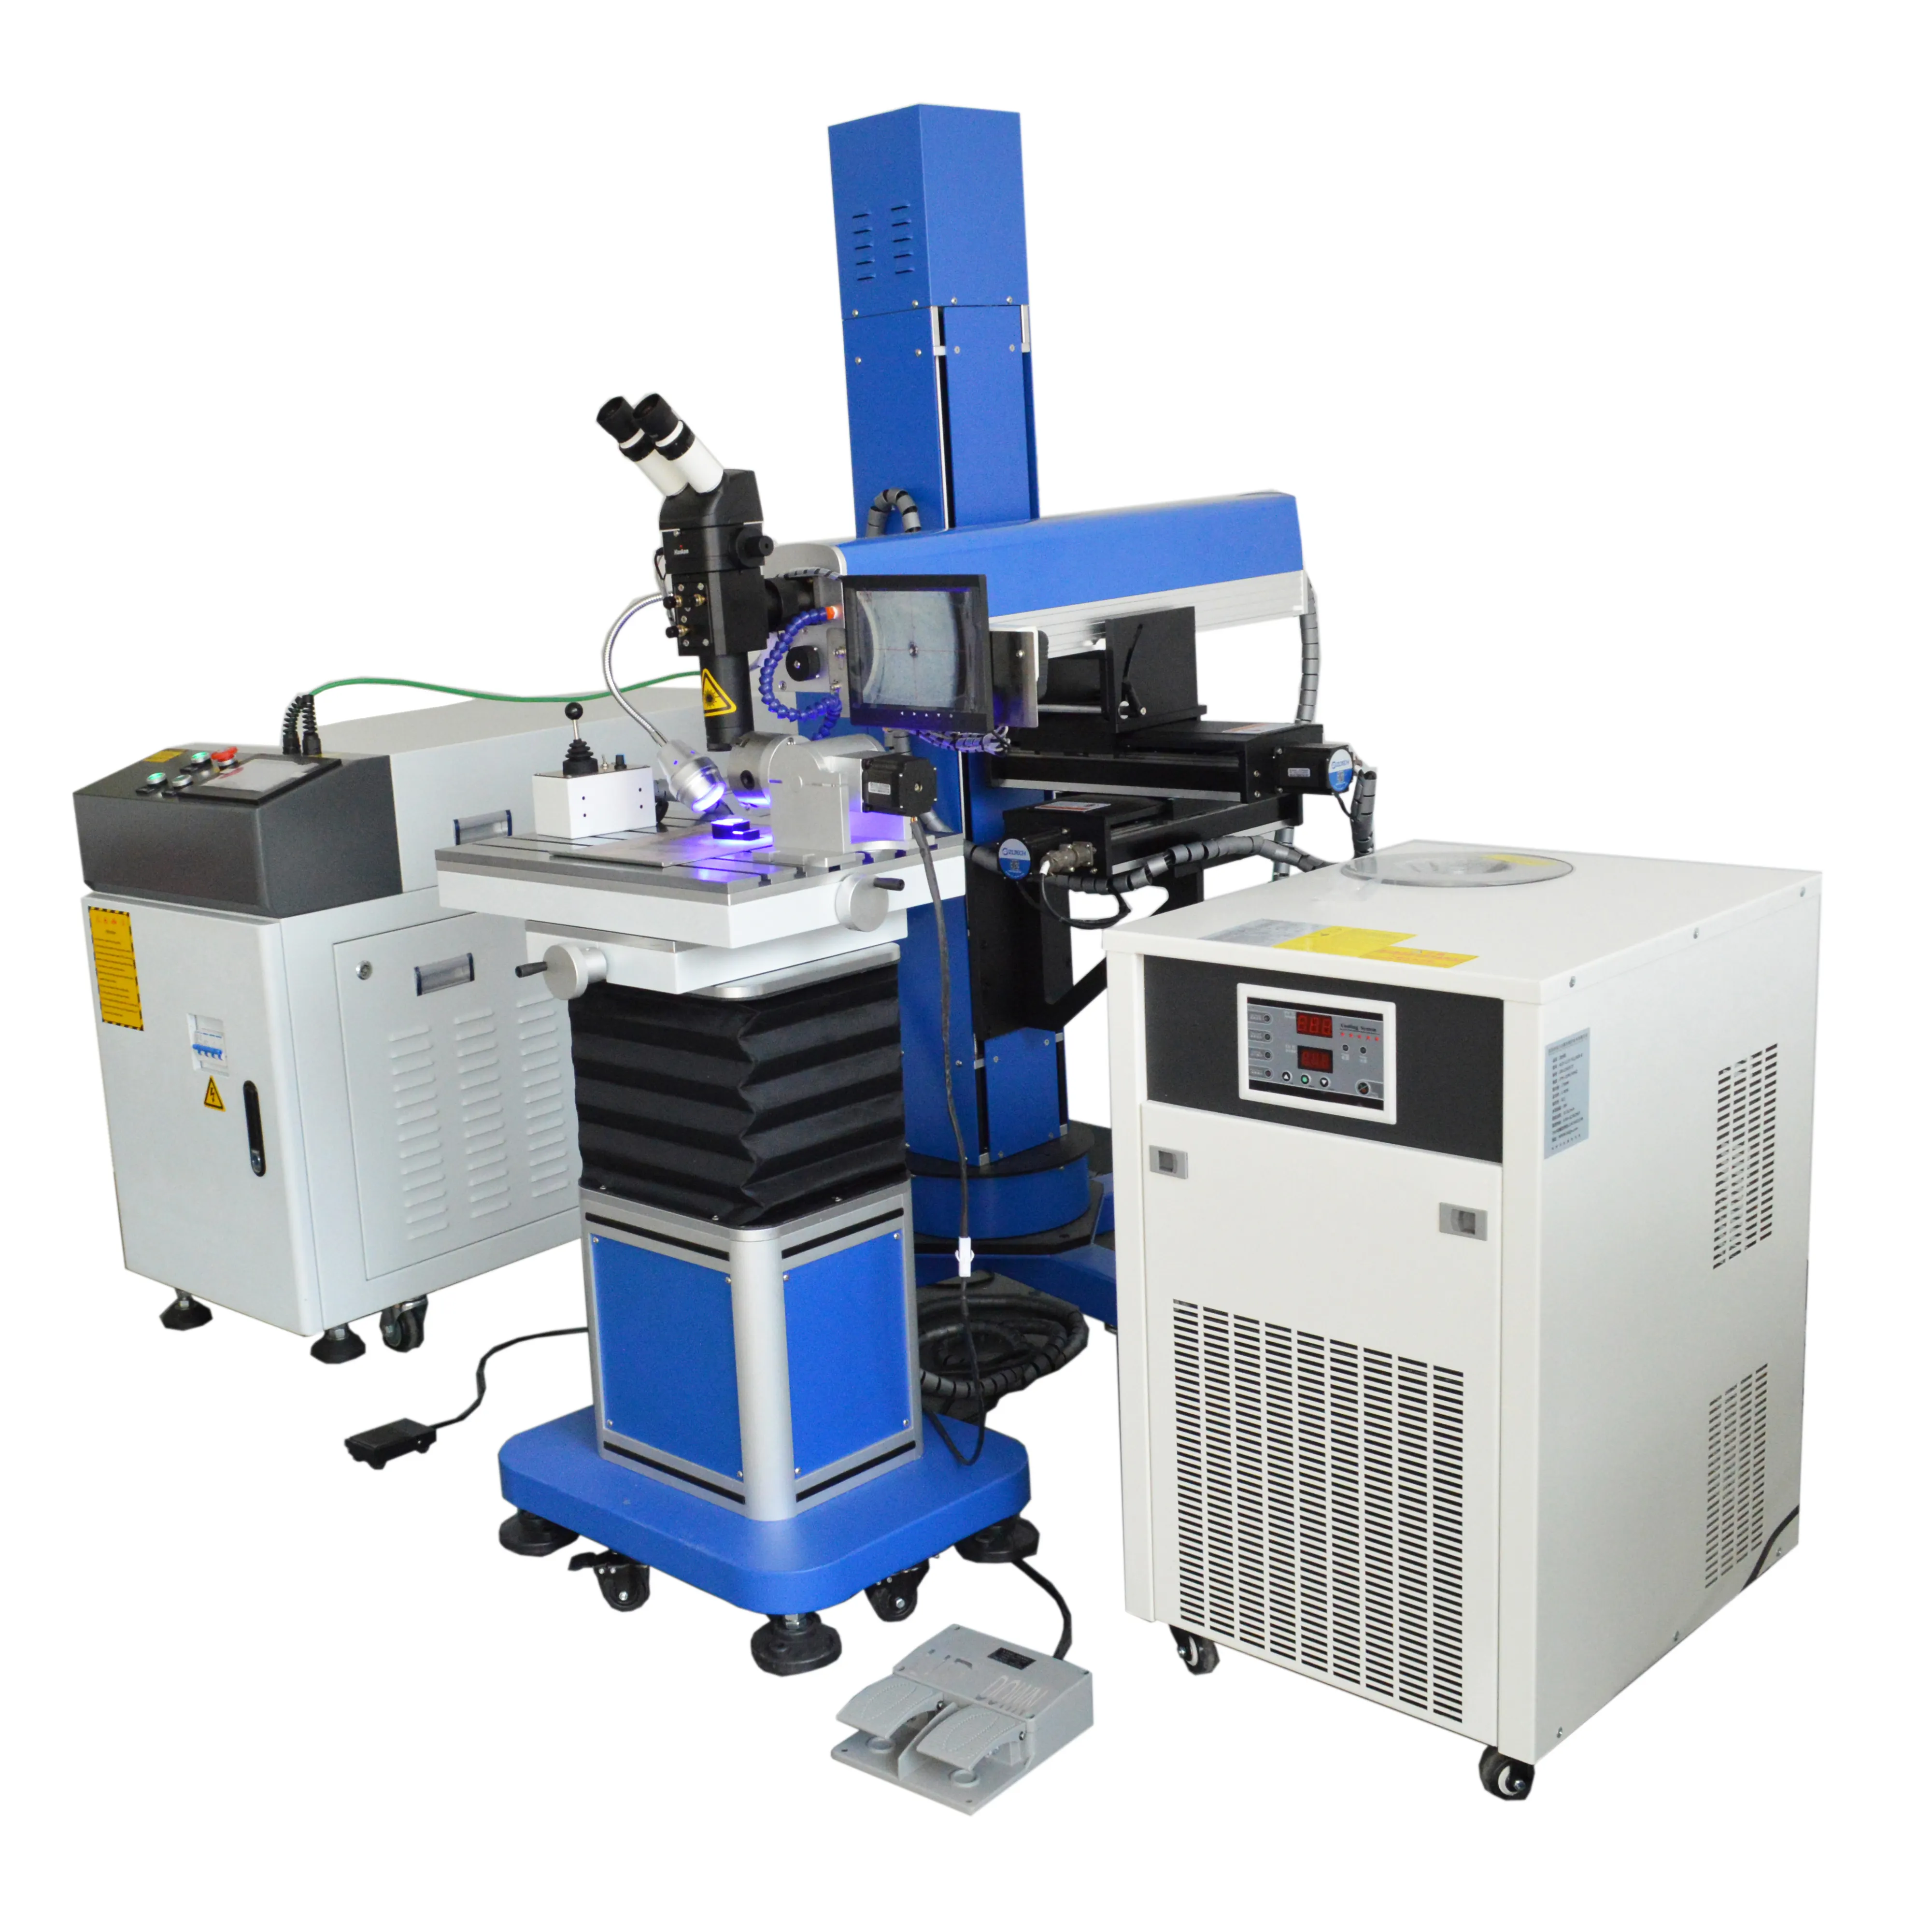 Top quality gold jewelry repairing laser soldering welding machine system for jewellery gold